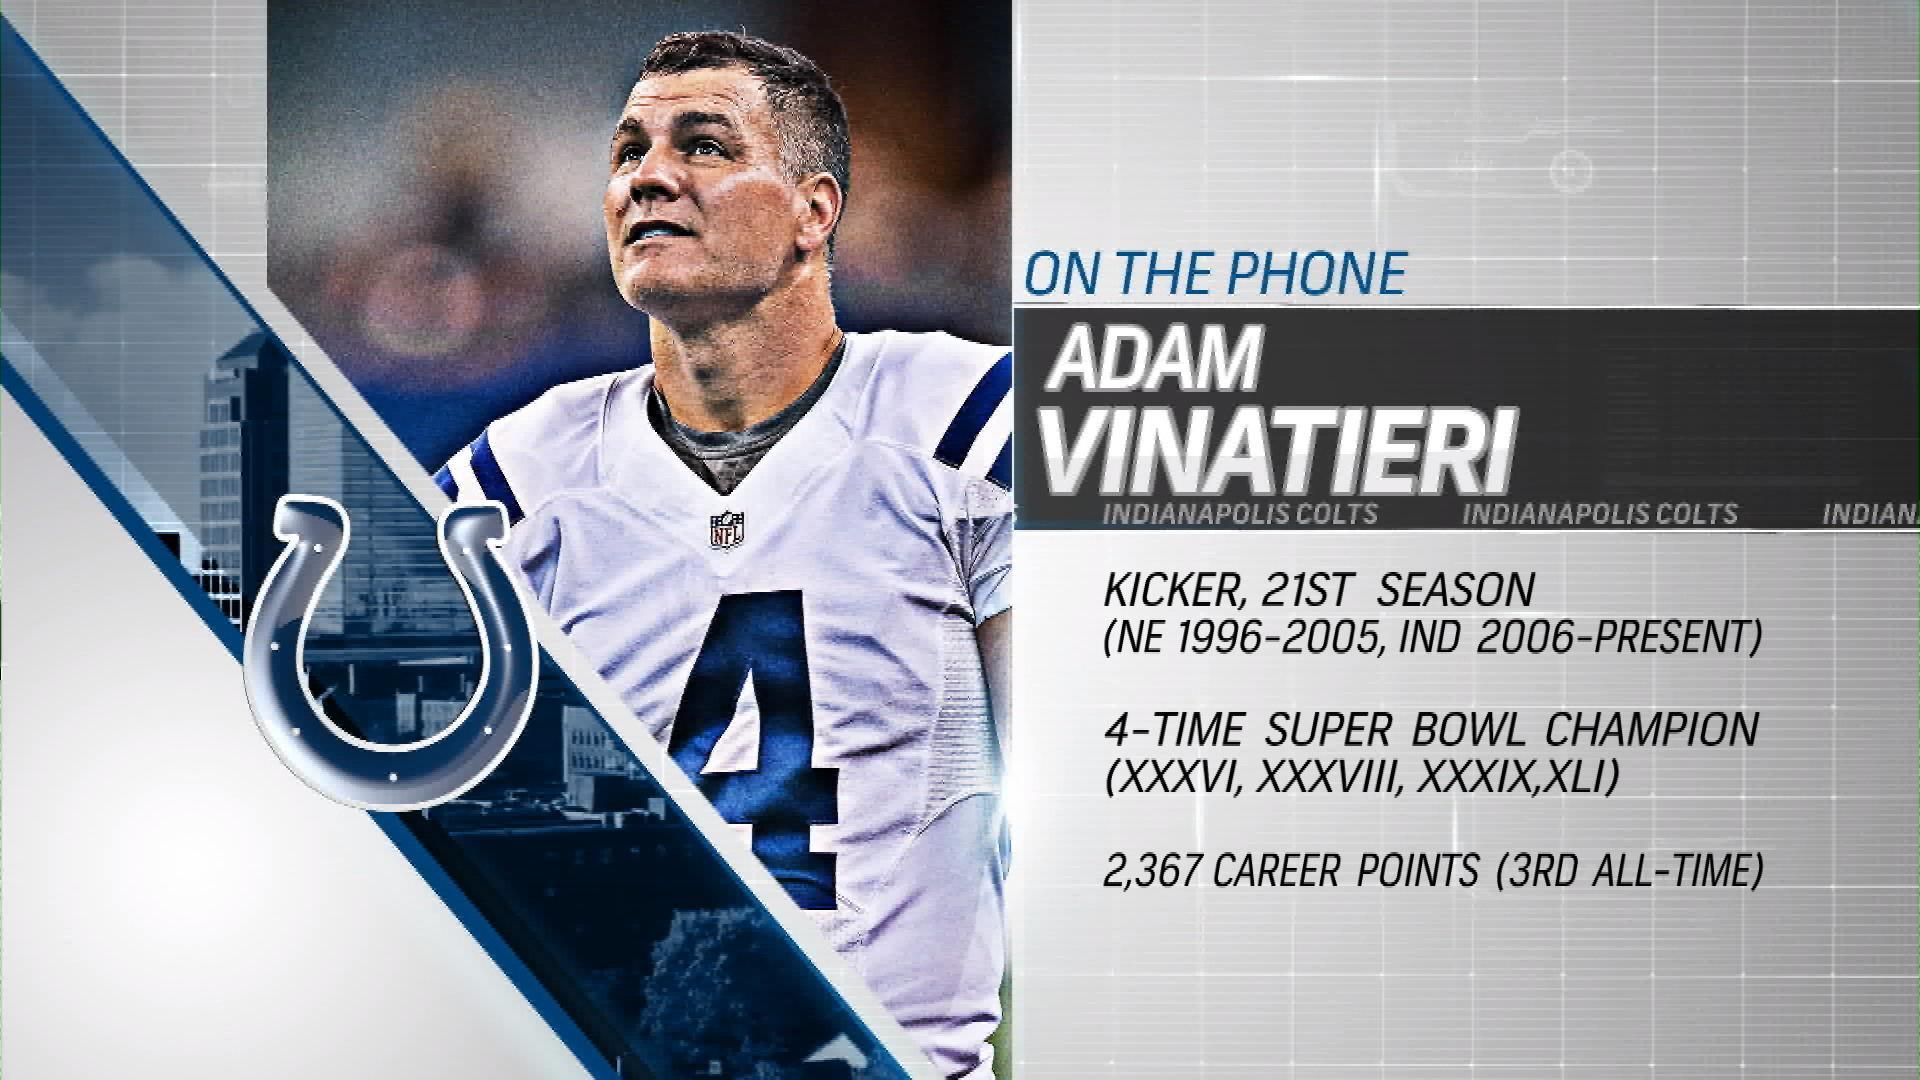 Adam Vinatieri continues to get better with age